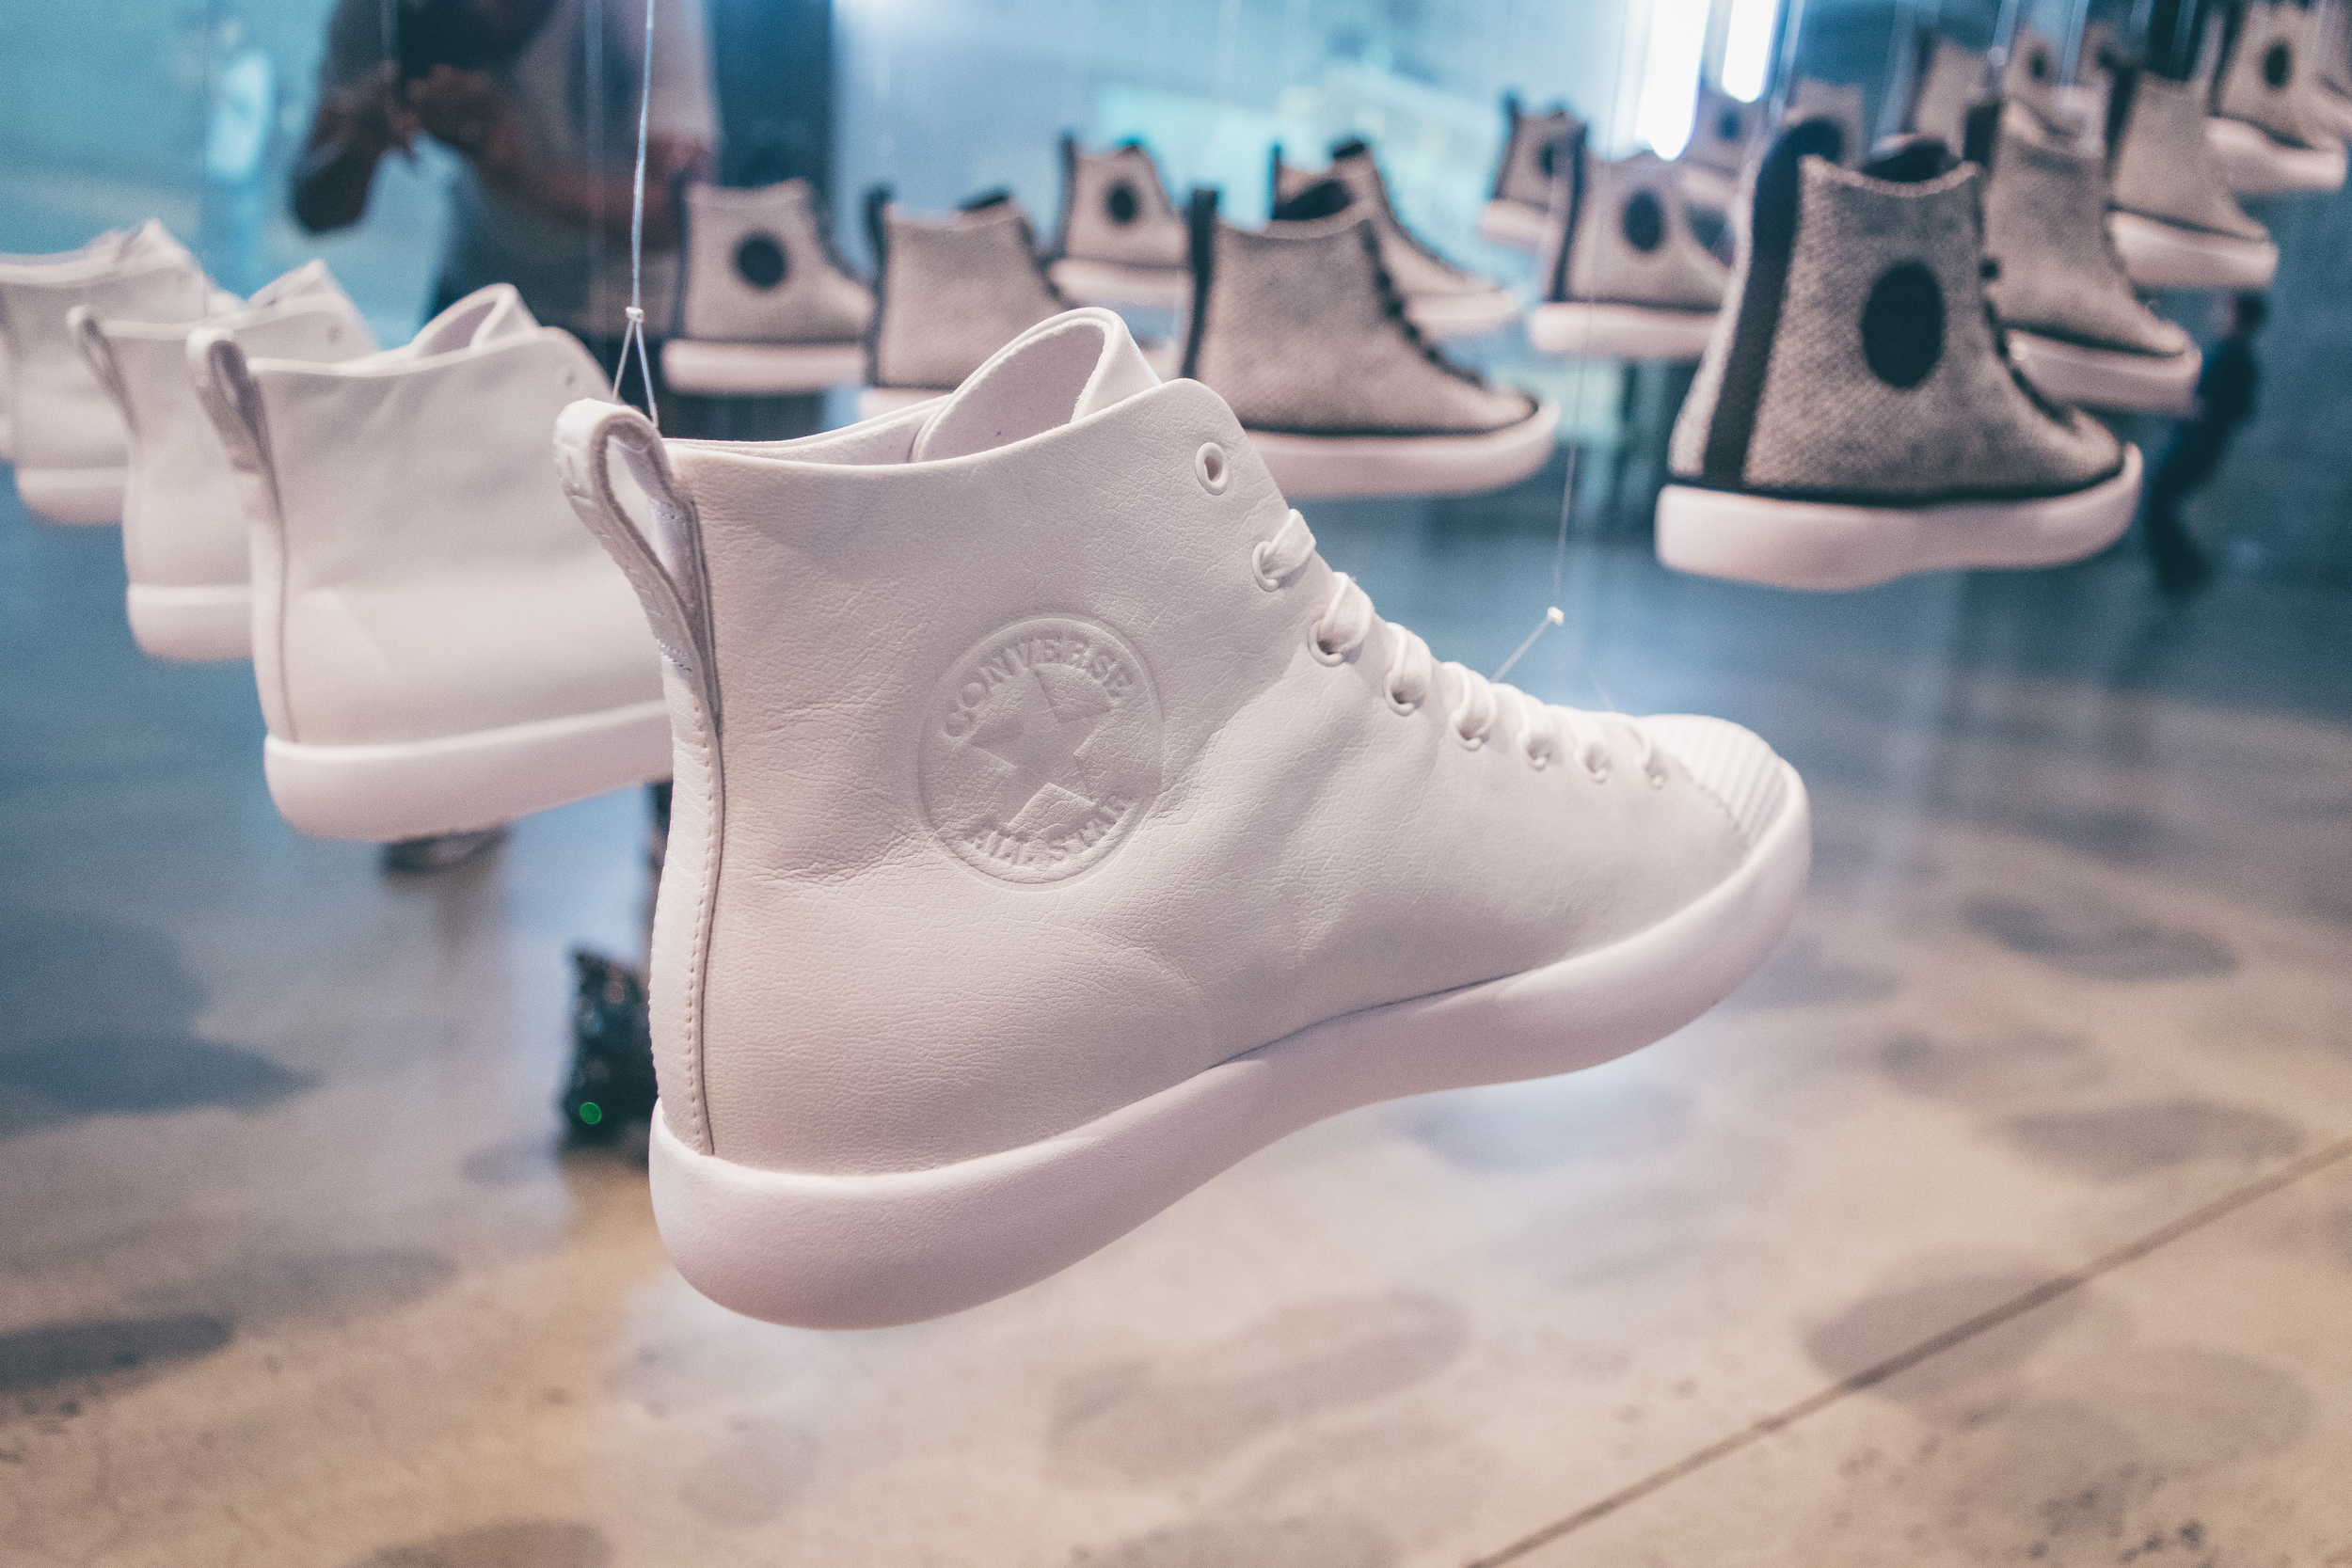  Converse unveils All Star Modern sneaker in NY. / Photo: ©&nbsp;Nabil Miftahi for SUSPEND Magazine 